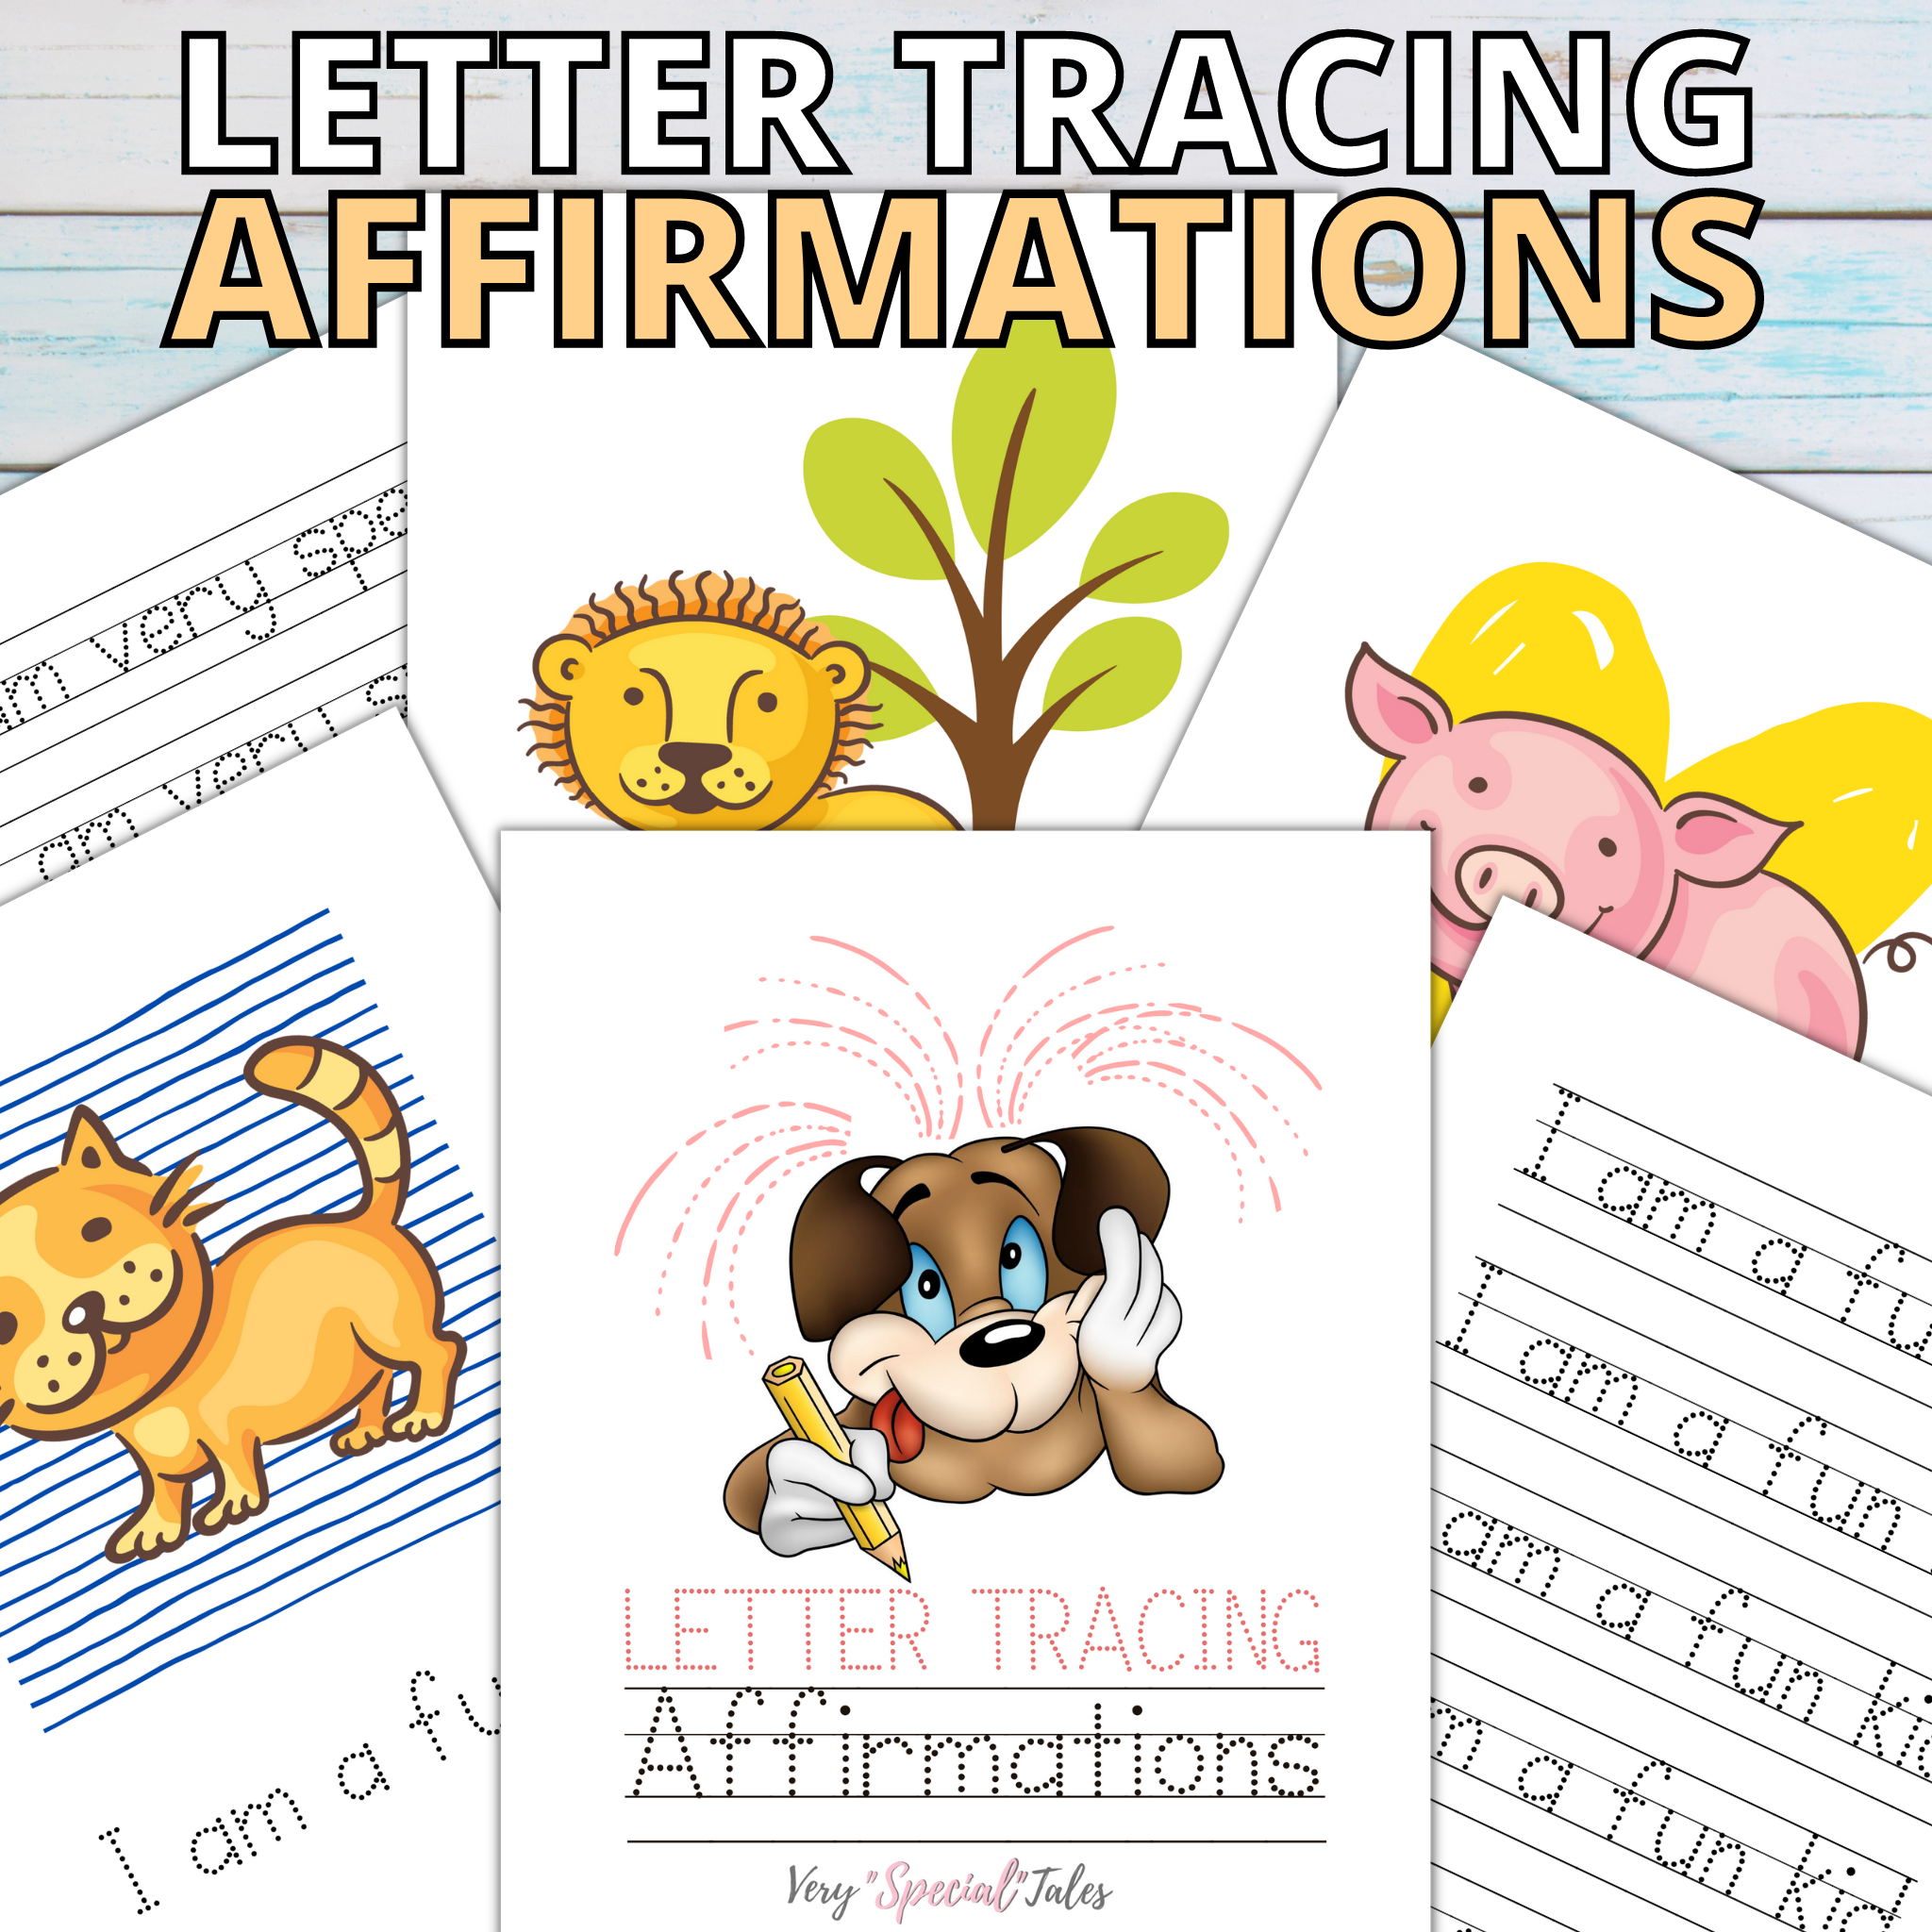 Letter Tracing Affirmations